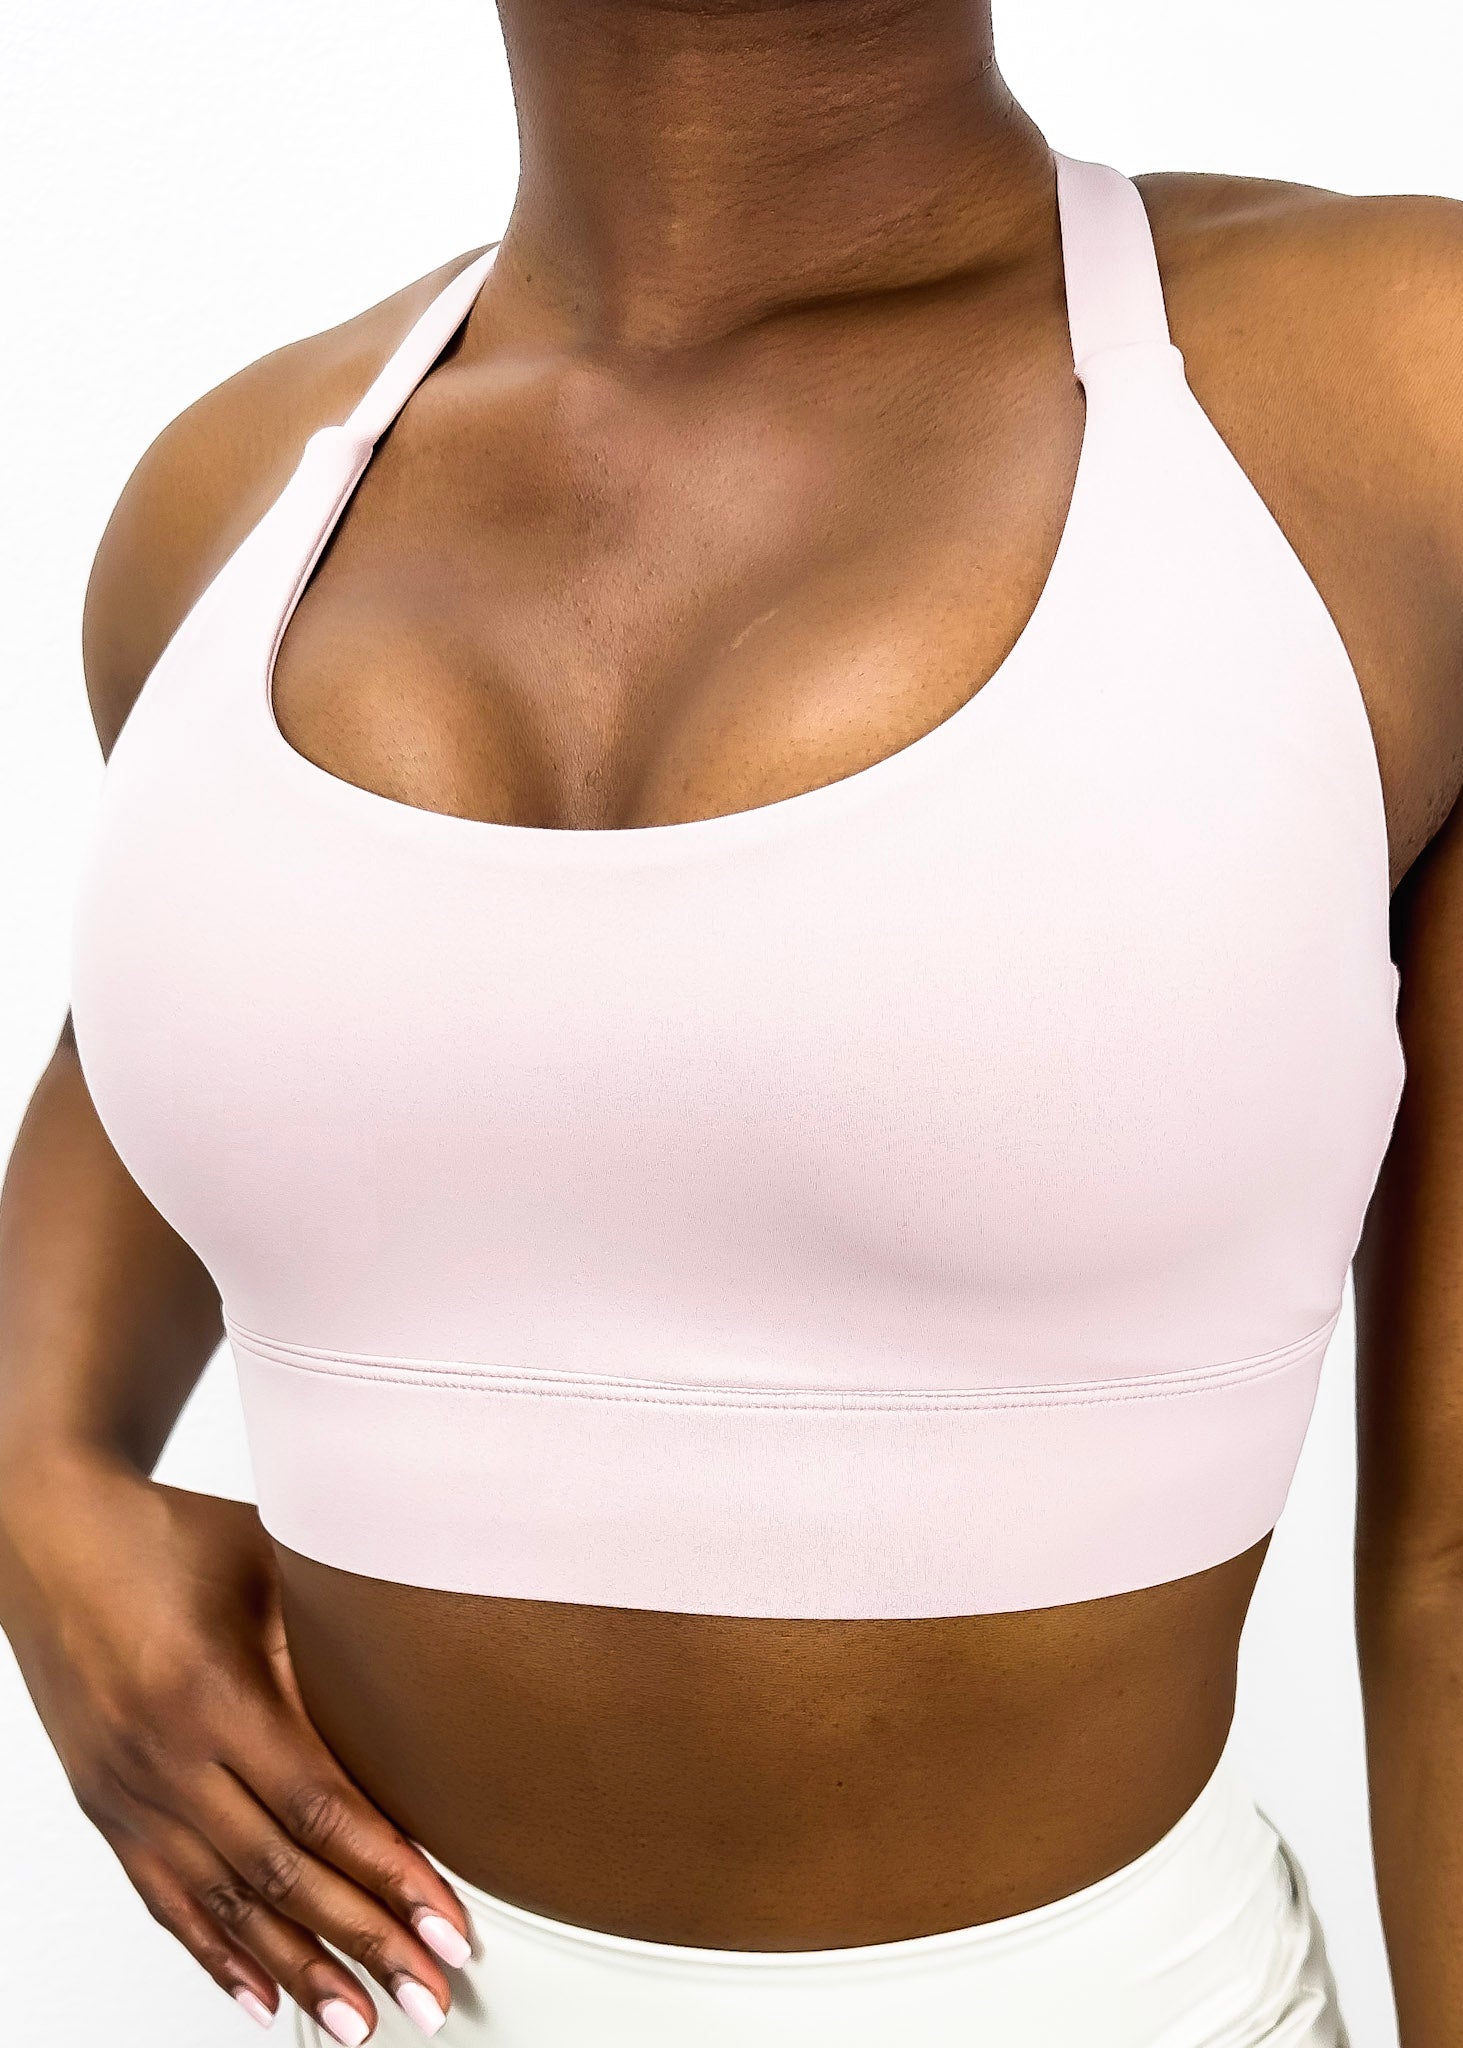 B943 Compression Arm Sleeve with Adjustable Cotton Knit Bra